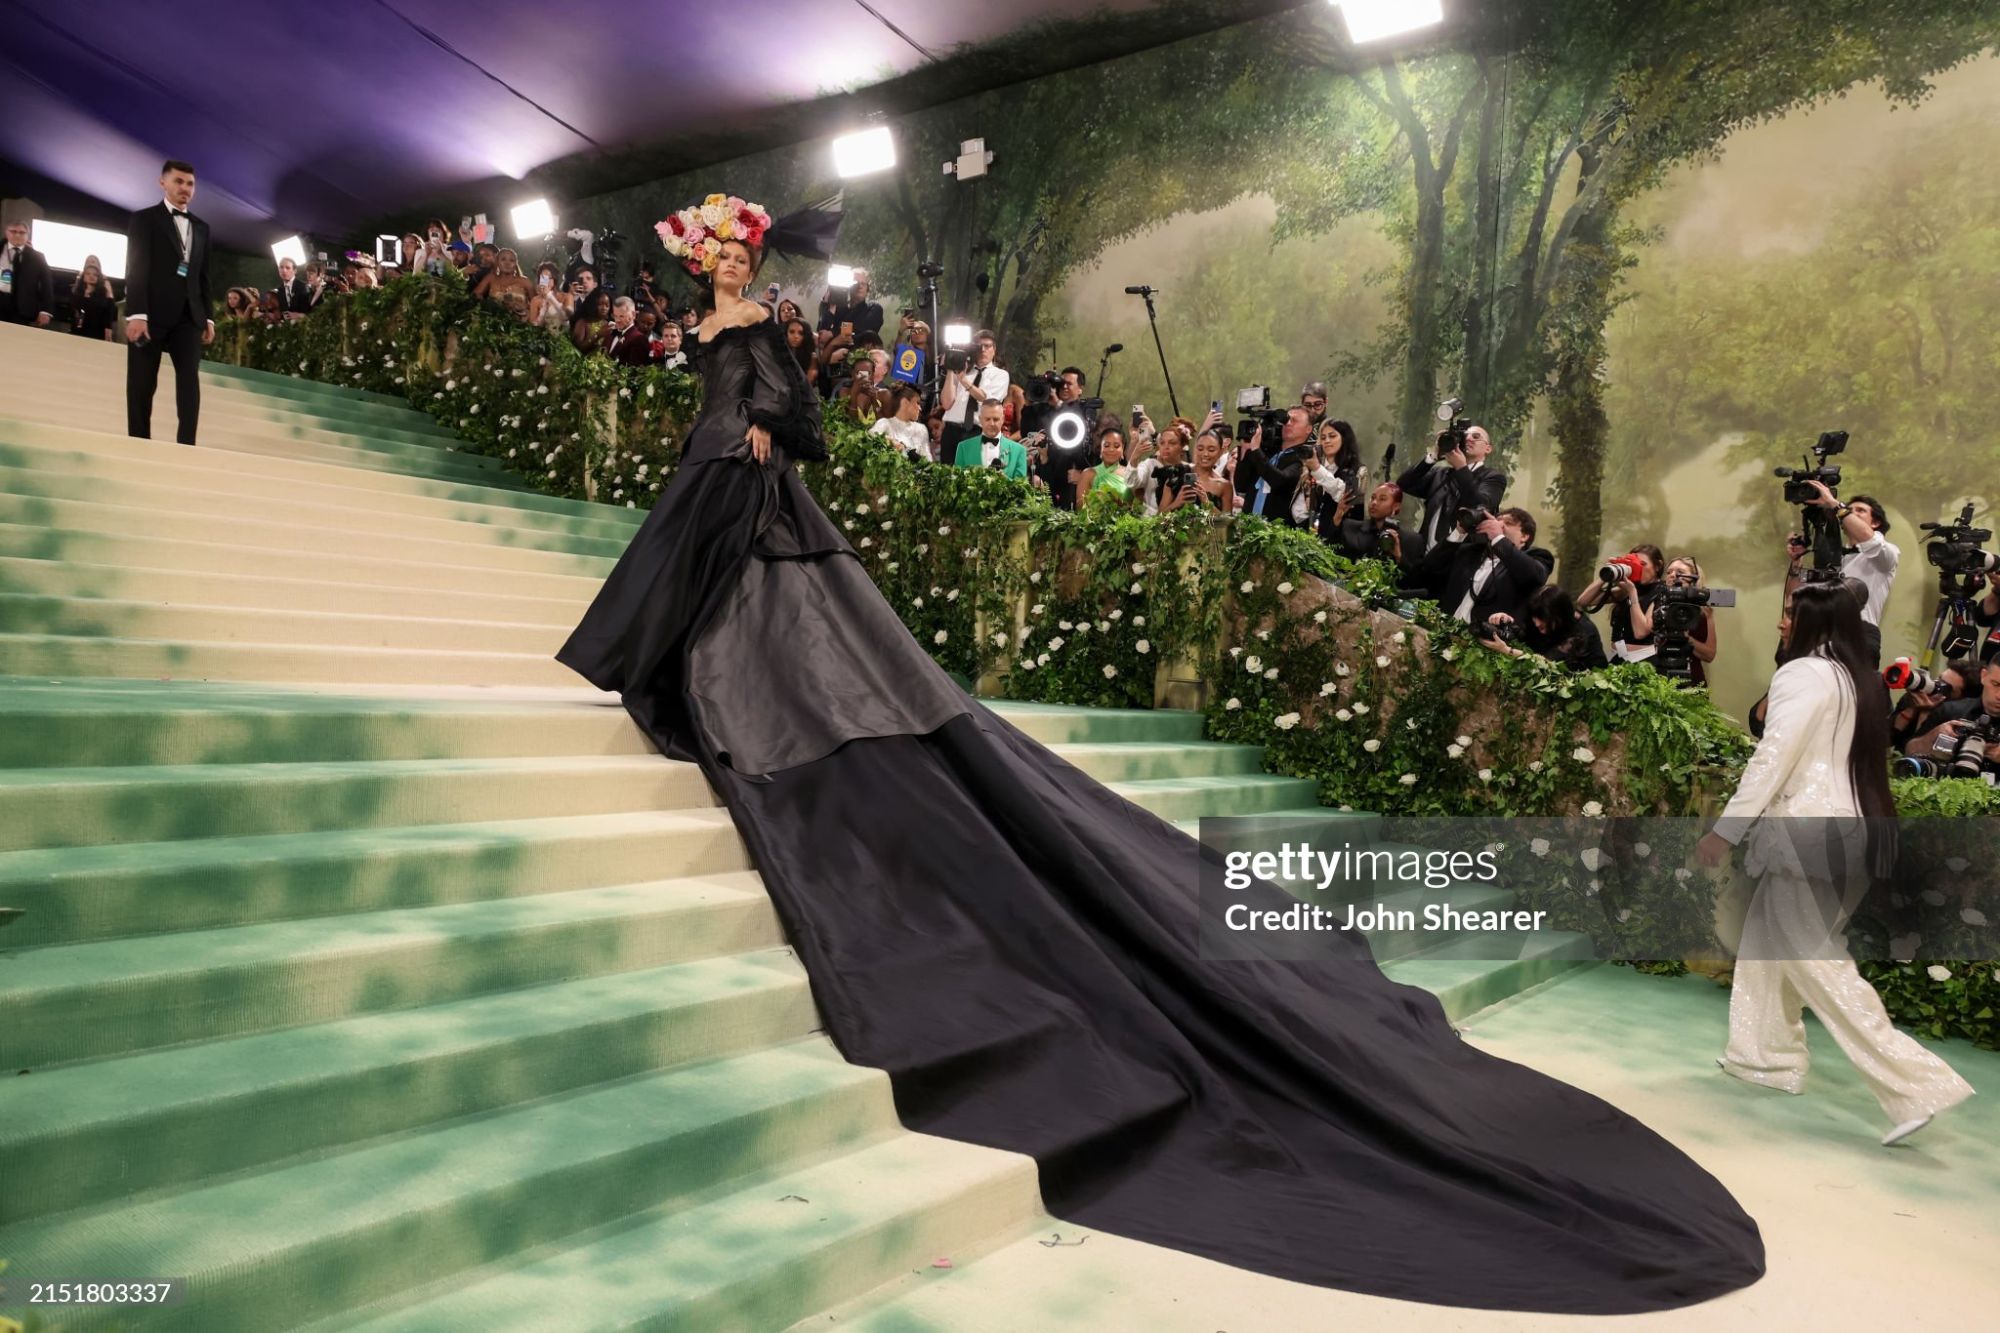 gettyimages-2151803337-2048x2048.jpg